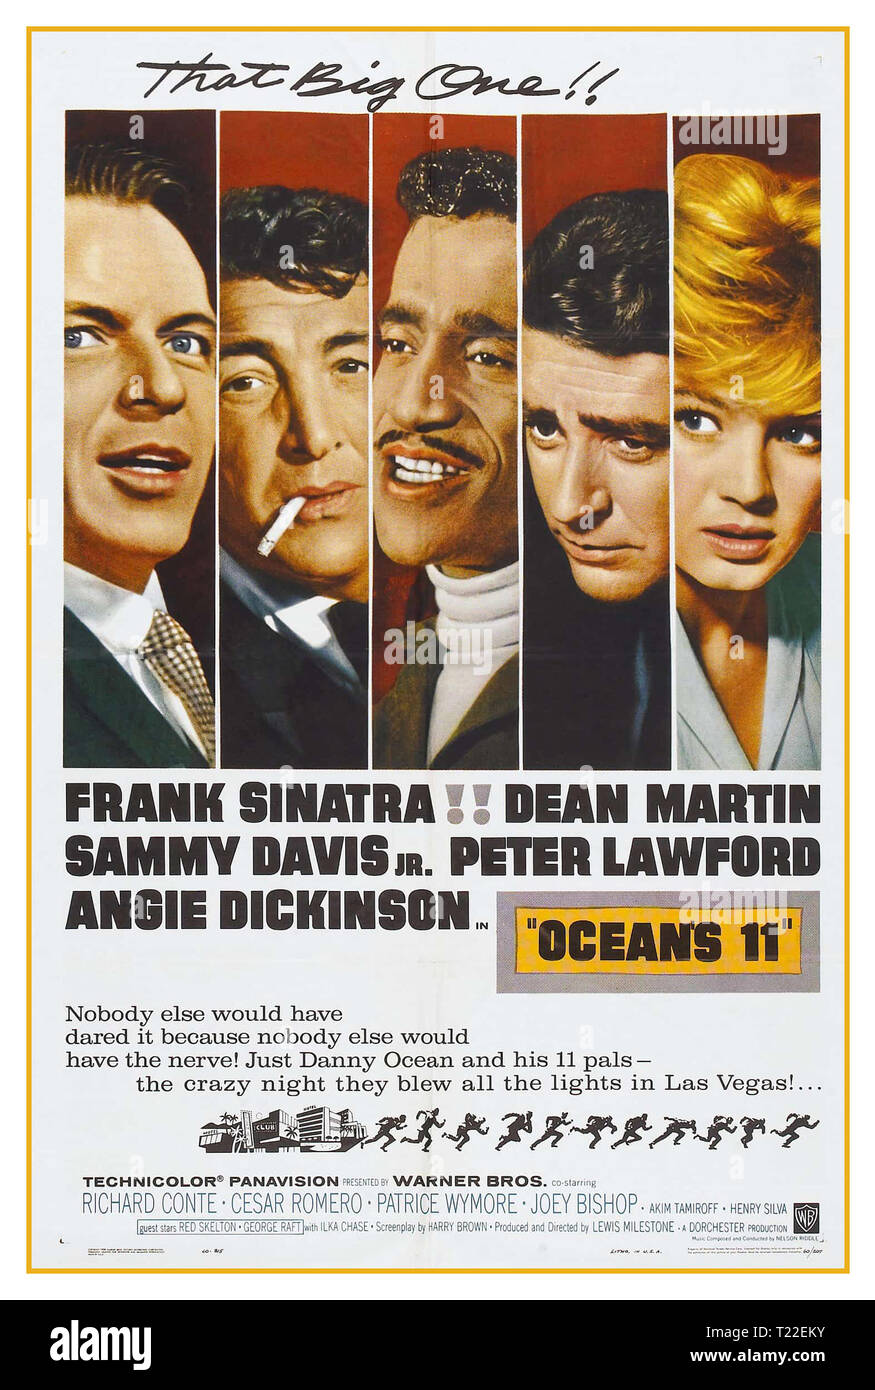 https://c8.alamy.com/comp/T22EKY/vintage-movie-poster-oceans-11-10-august-1960-usa-danny-ocean-frank-sinatra-calls-on-some-of-his-world-war-ii-friends-with-jimmy-foster-peter-lawford-sam-harmon-dean-martin-and-josh-howard-sammy-davis-jr-to-pull-off-series-of-new-years-eve-robberys-at-five-casinos-in-las-vegas-they-suffer-a-series-of-setbacks-when-duke-santos-cesar-romero-a-former-gangster-tries-to-stop-oceans-plans-to-get-away-with-the-cash-1960s-rat-pack-movie-poster-las-vegas-usa-T22EKY.jpg